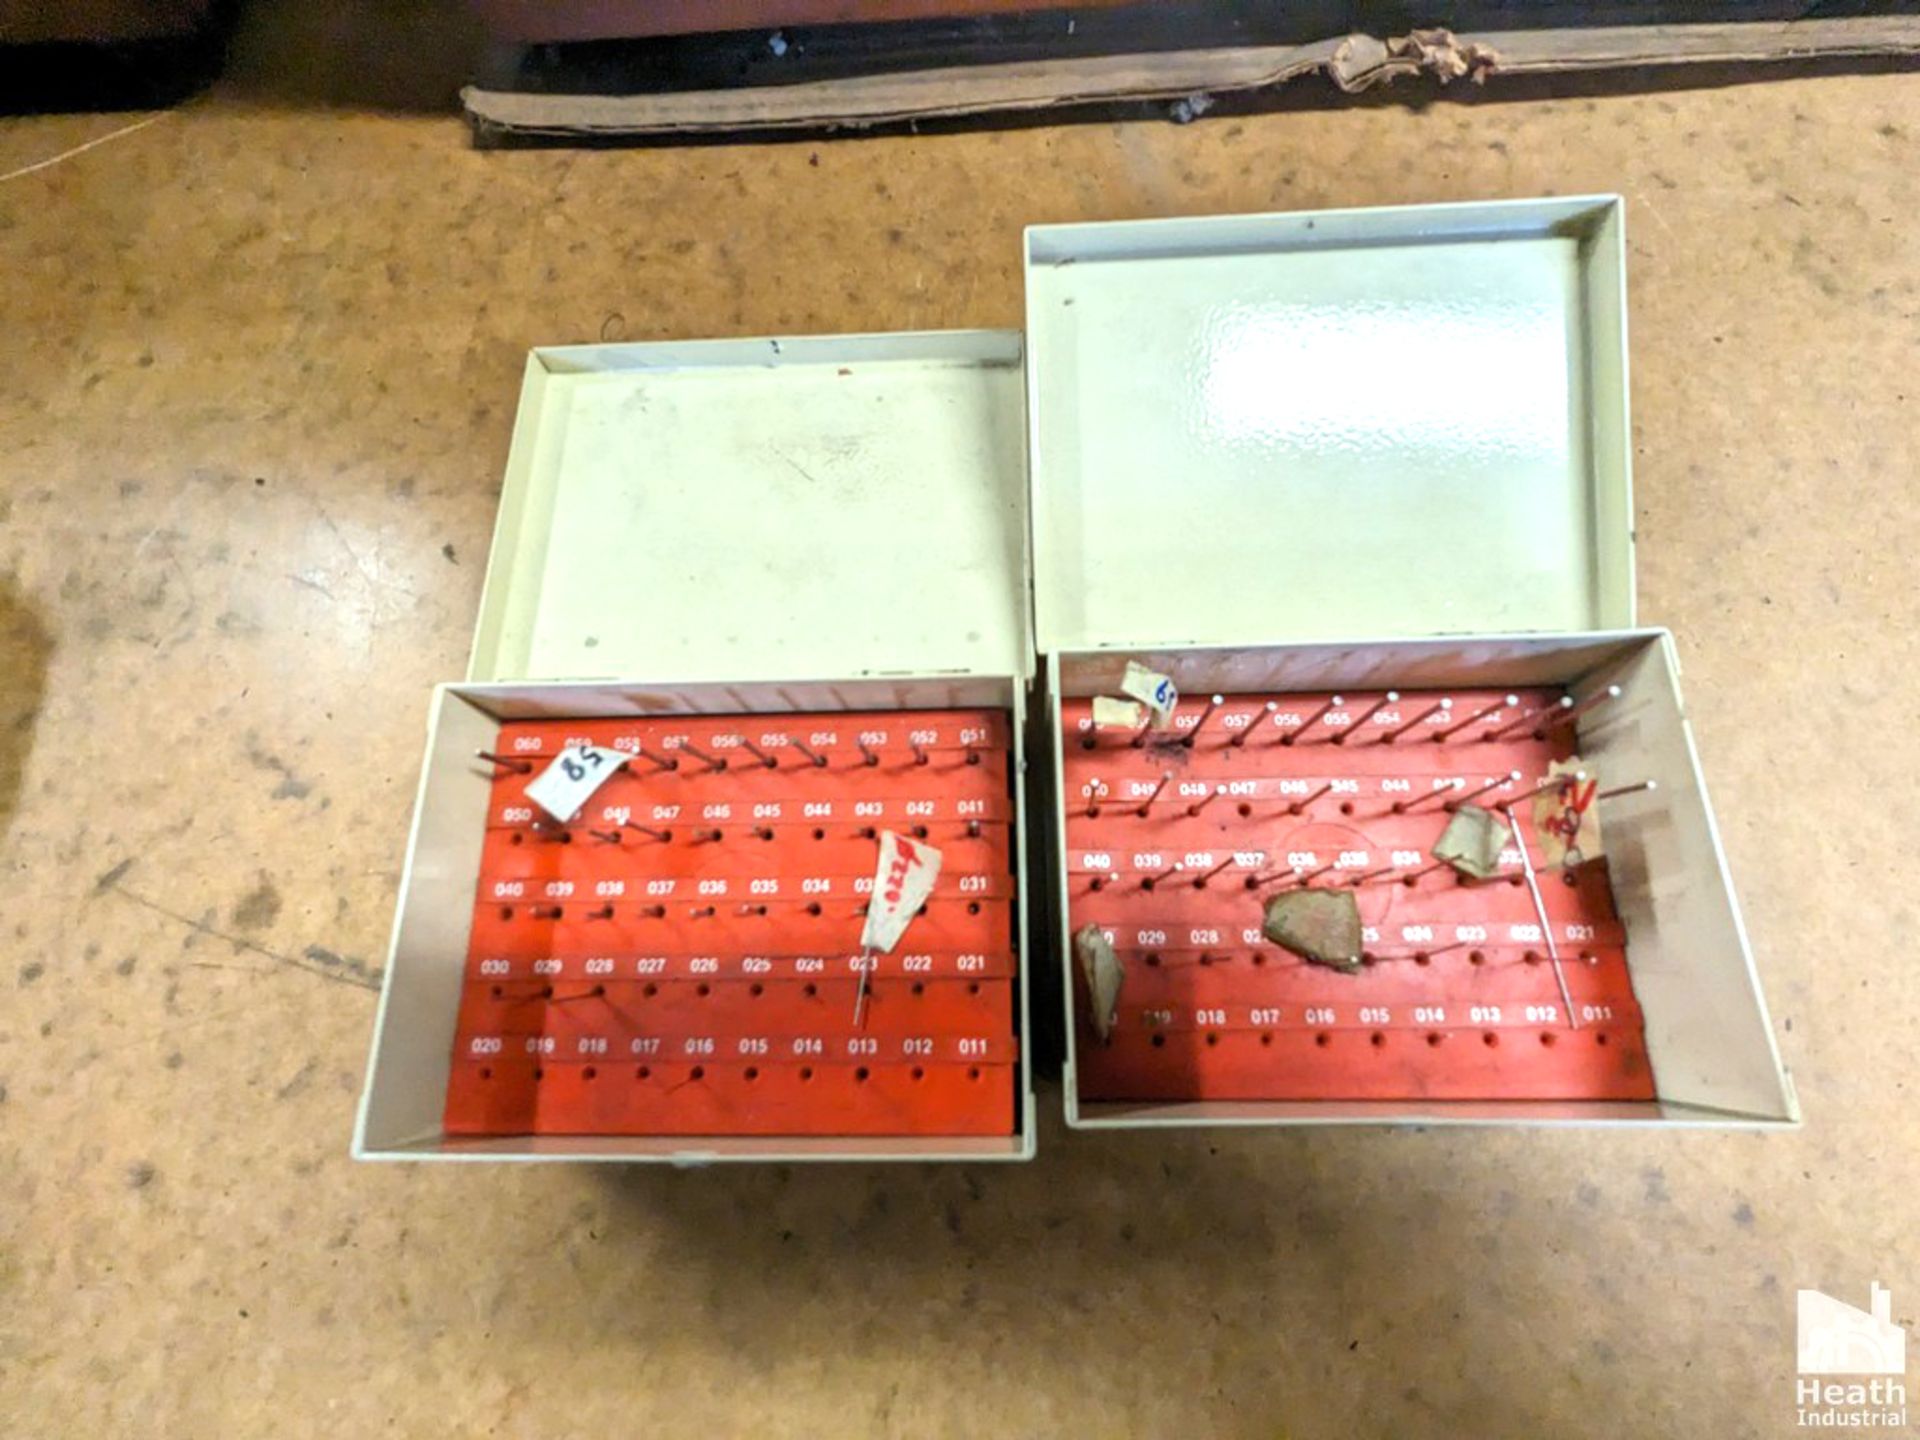 (2) VERMONT .011-.060 PLUS AND MINUS PIN GAUGE SETS